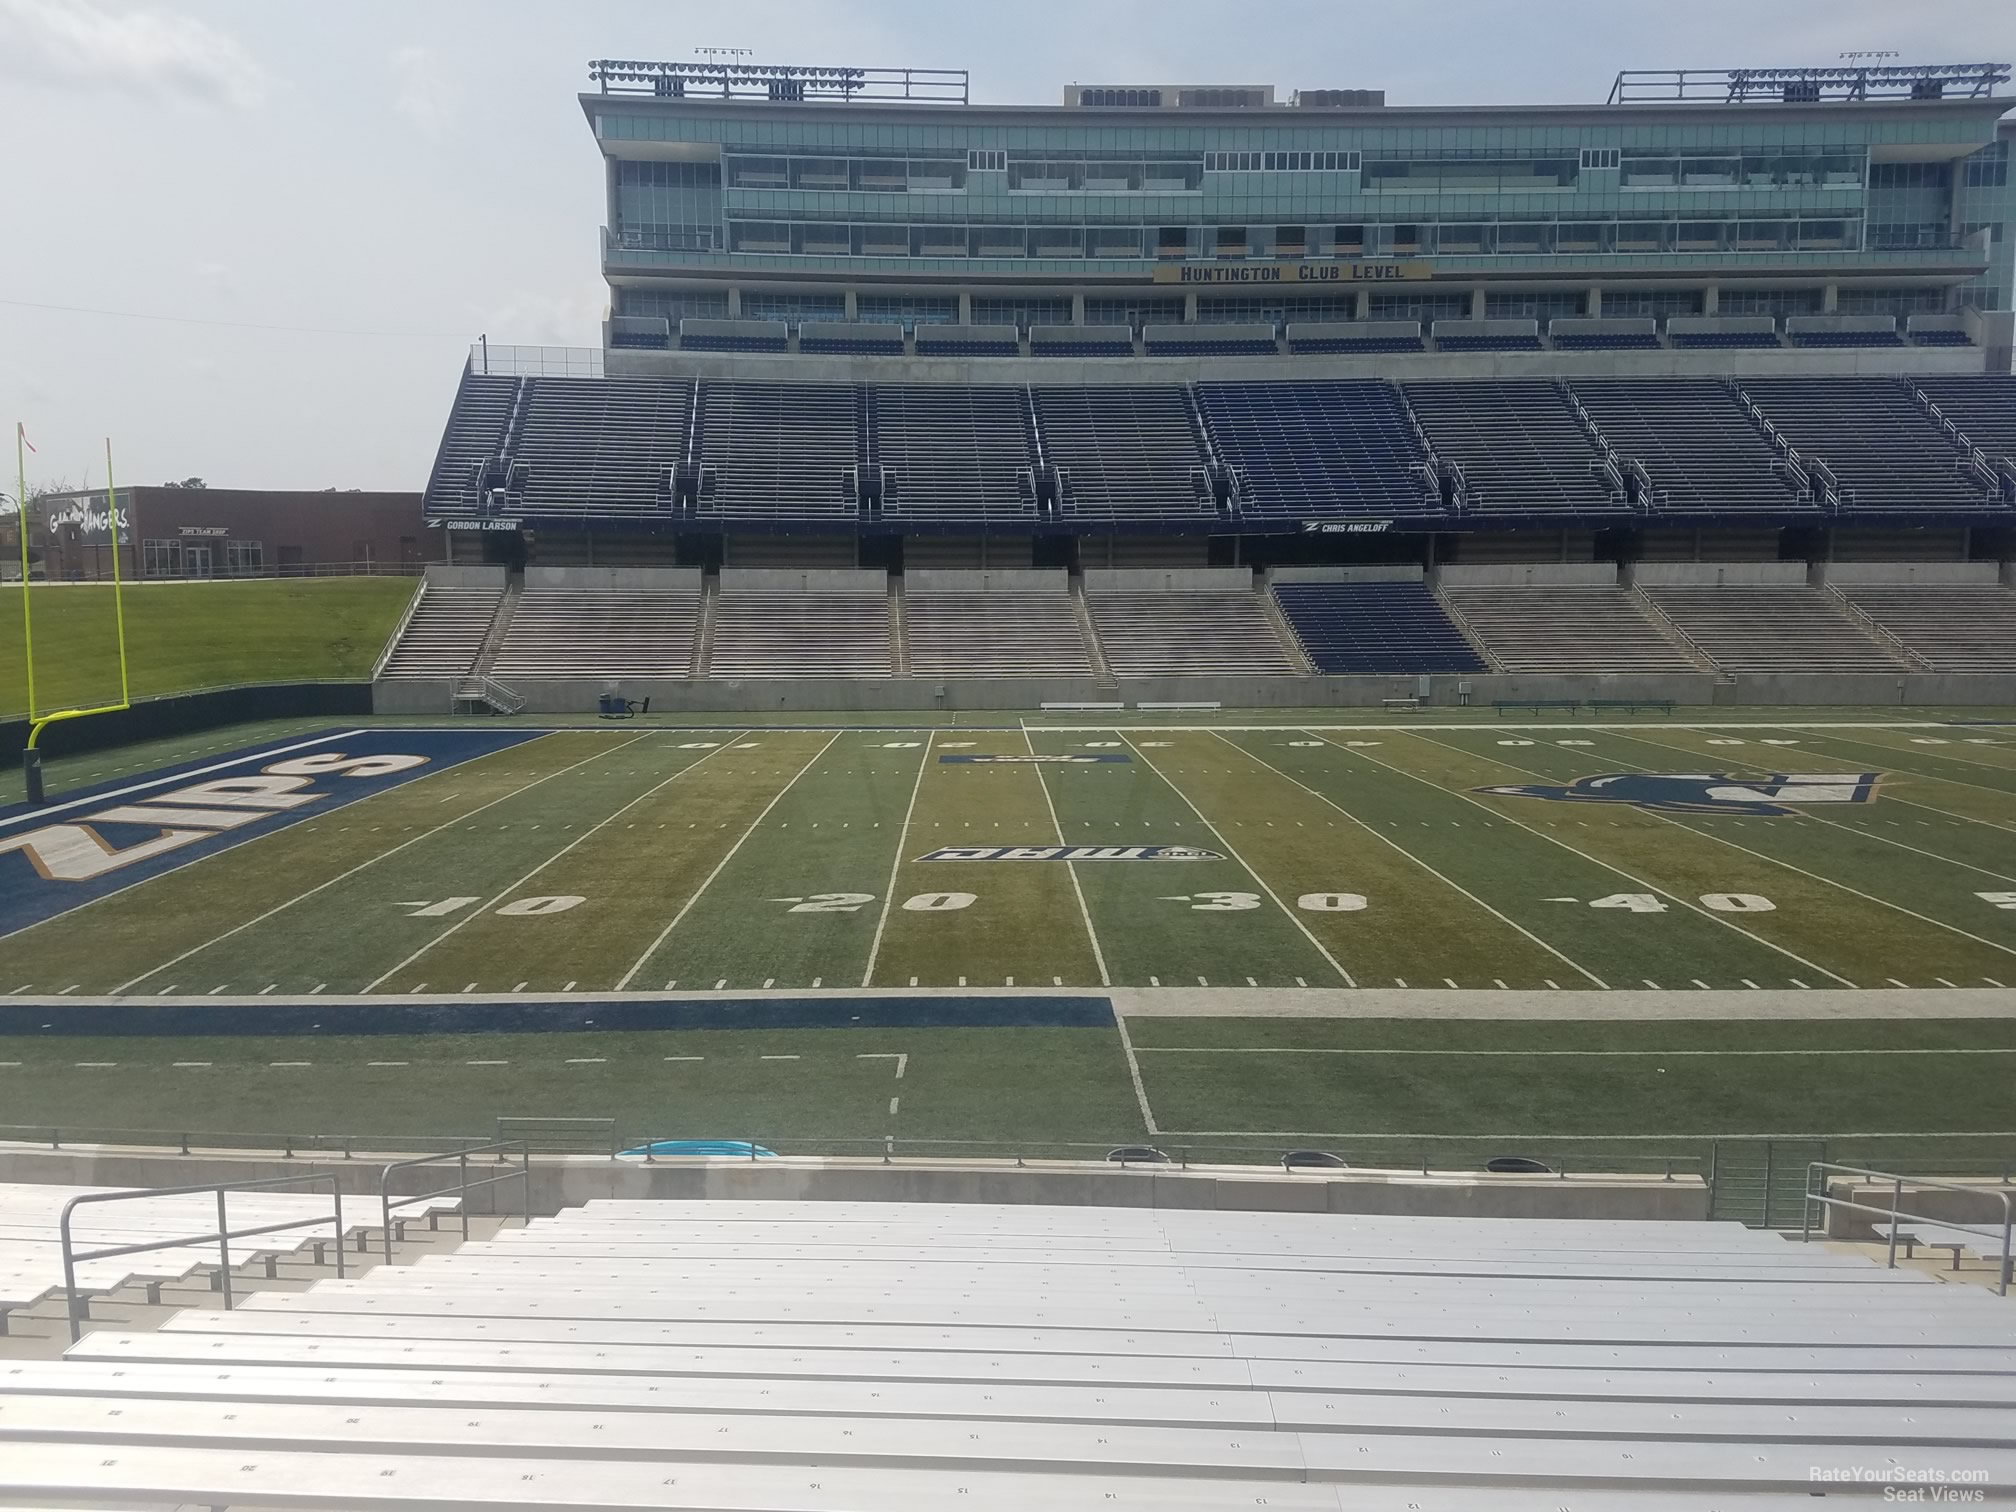 section 115, row 21 seat view  - infocision stadium